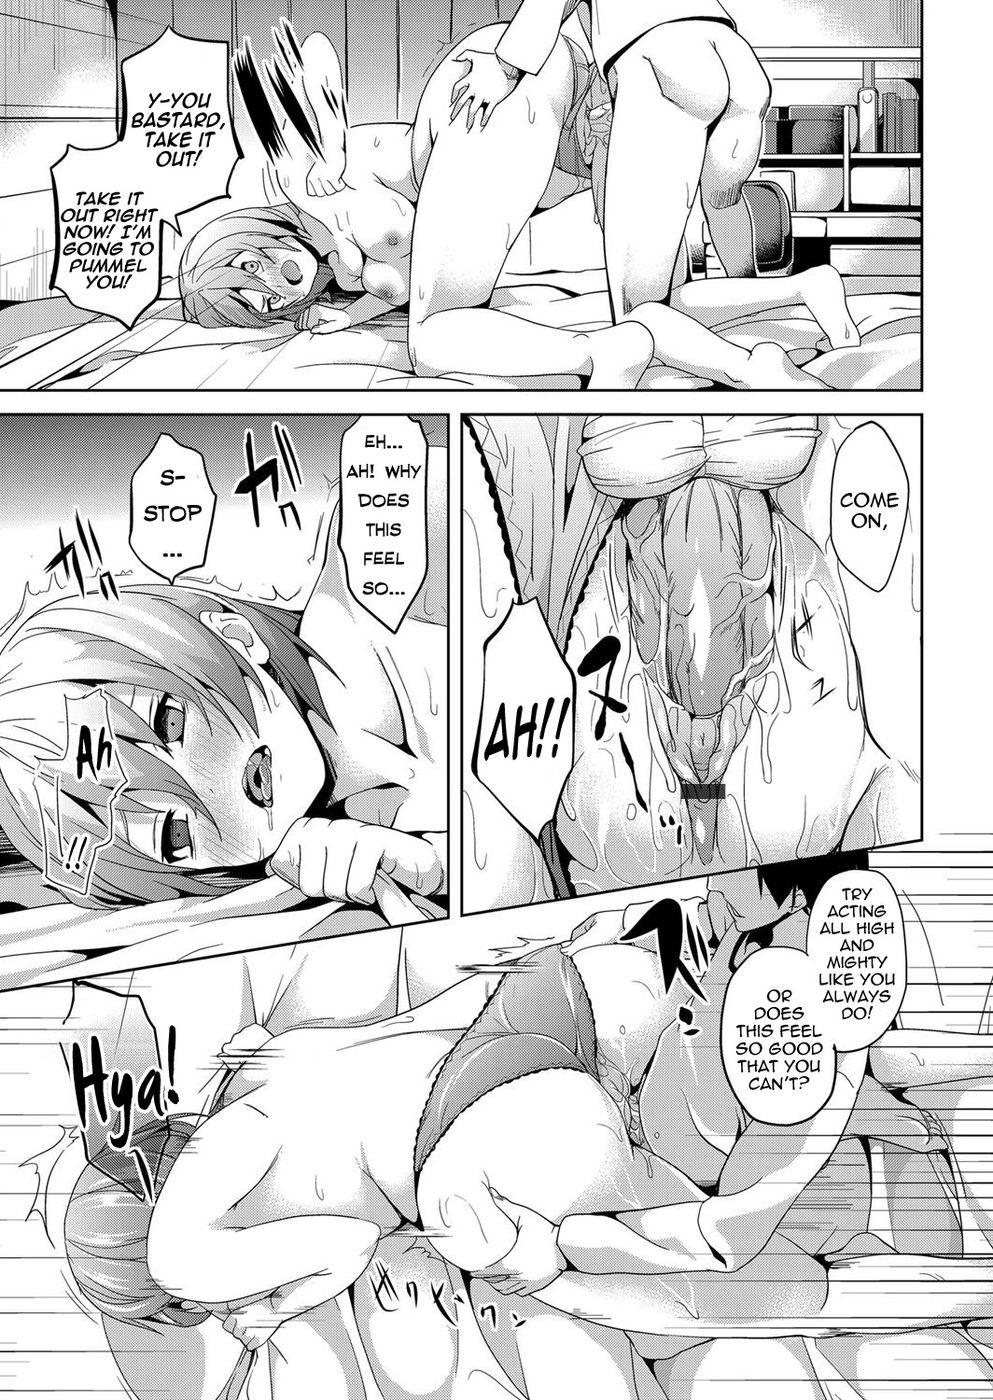 Video Sex Saat Di Hipnotis - Hypnosis DVD - The Case of the Elder Sister and Younger Brother-Read-Hentai  Manga Hentai Comic - Page: 15 - Online porn video at mobile